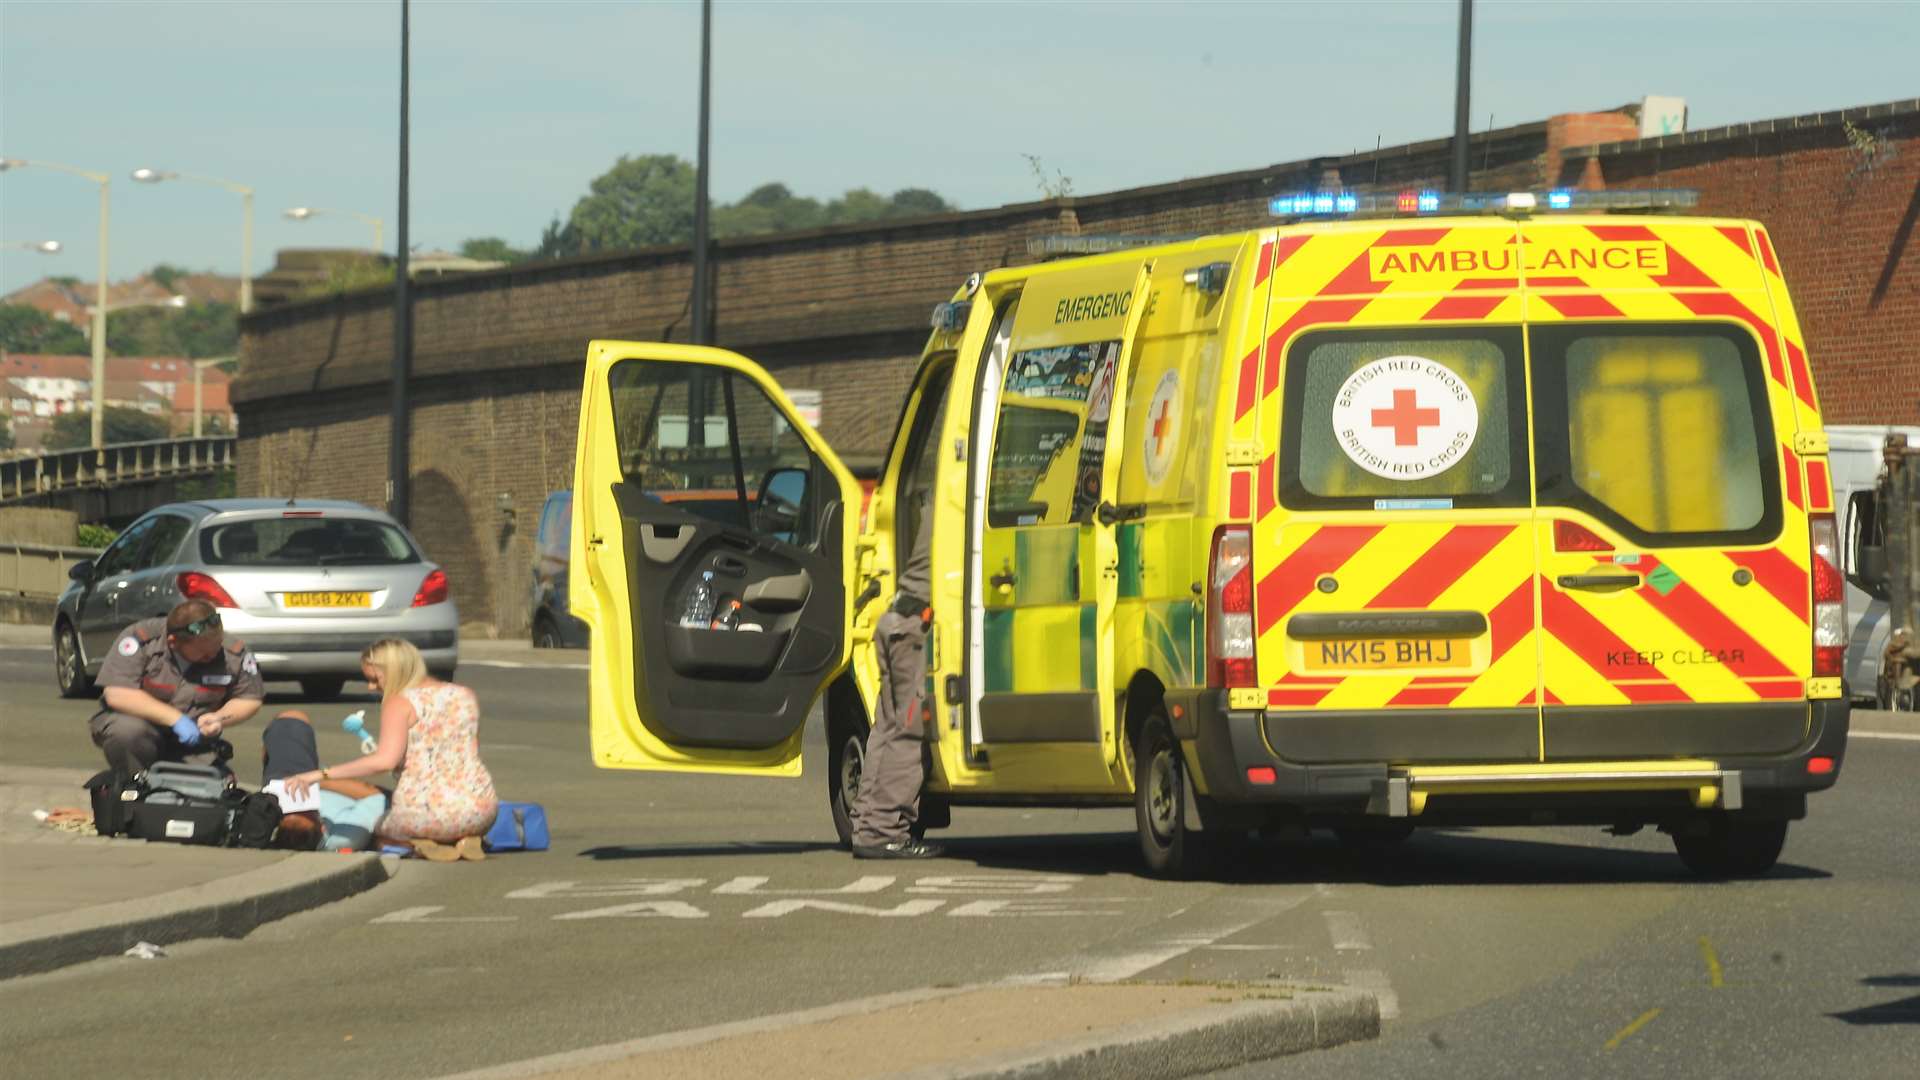 The man was taken to Medway Maritime Hospital after the hit and run